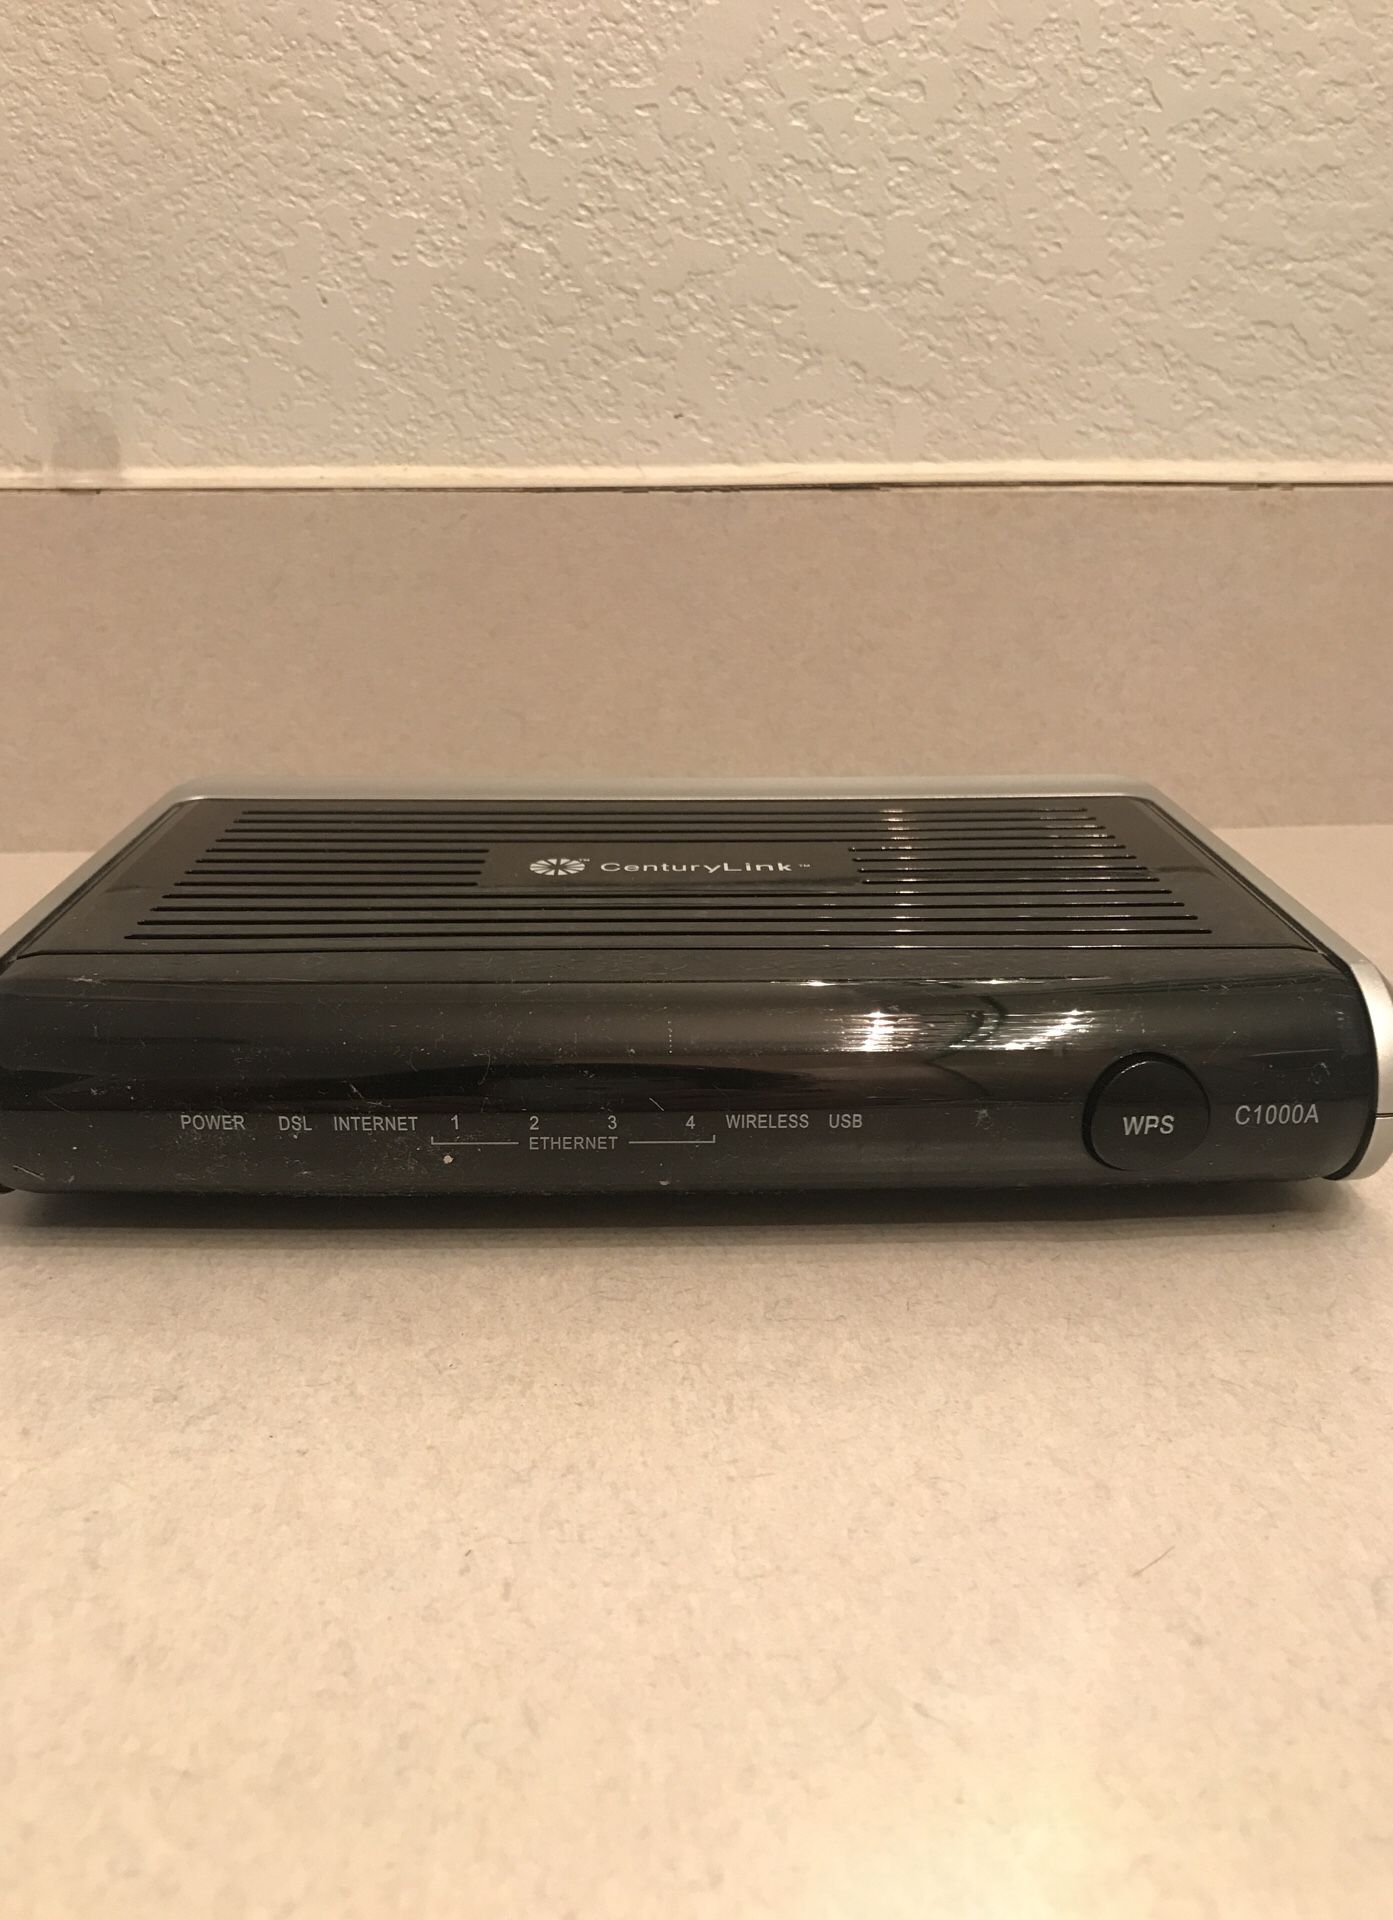 ActionTek Modem and Wireless-N Router Model C1000a